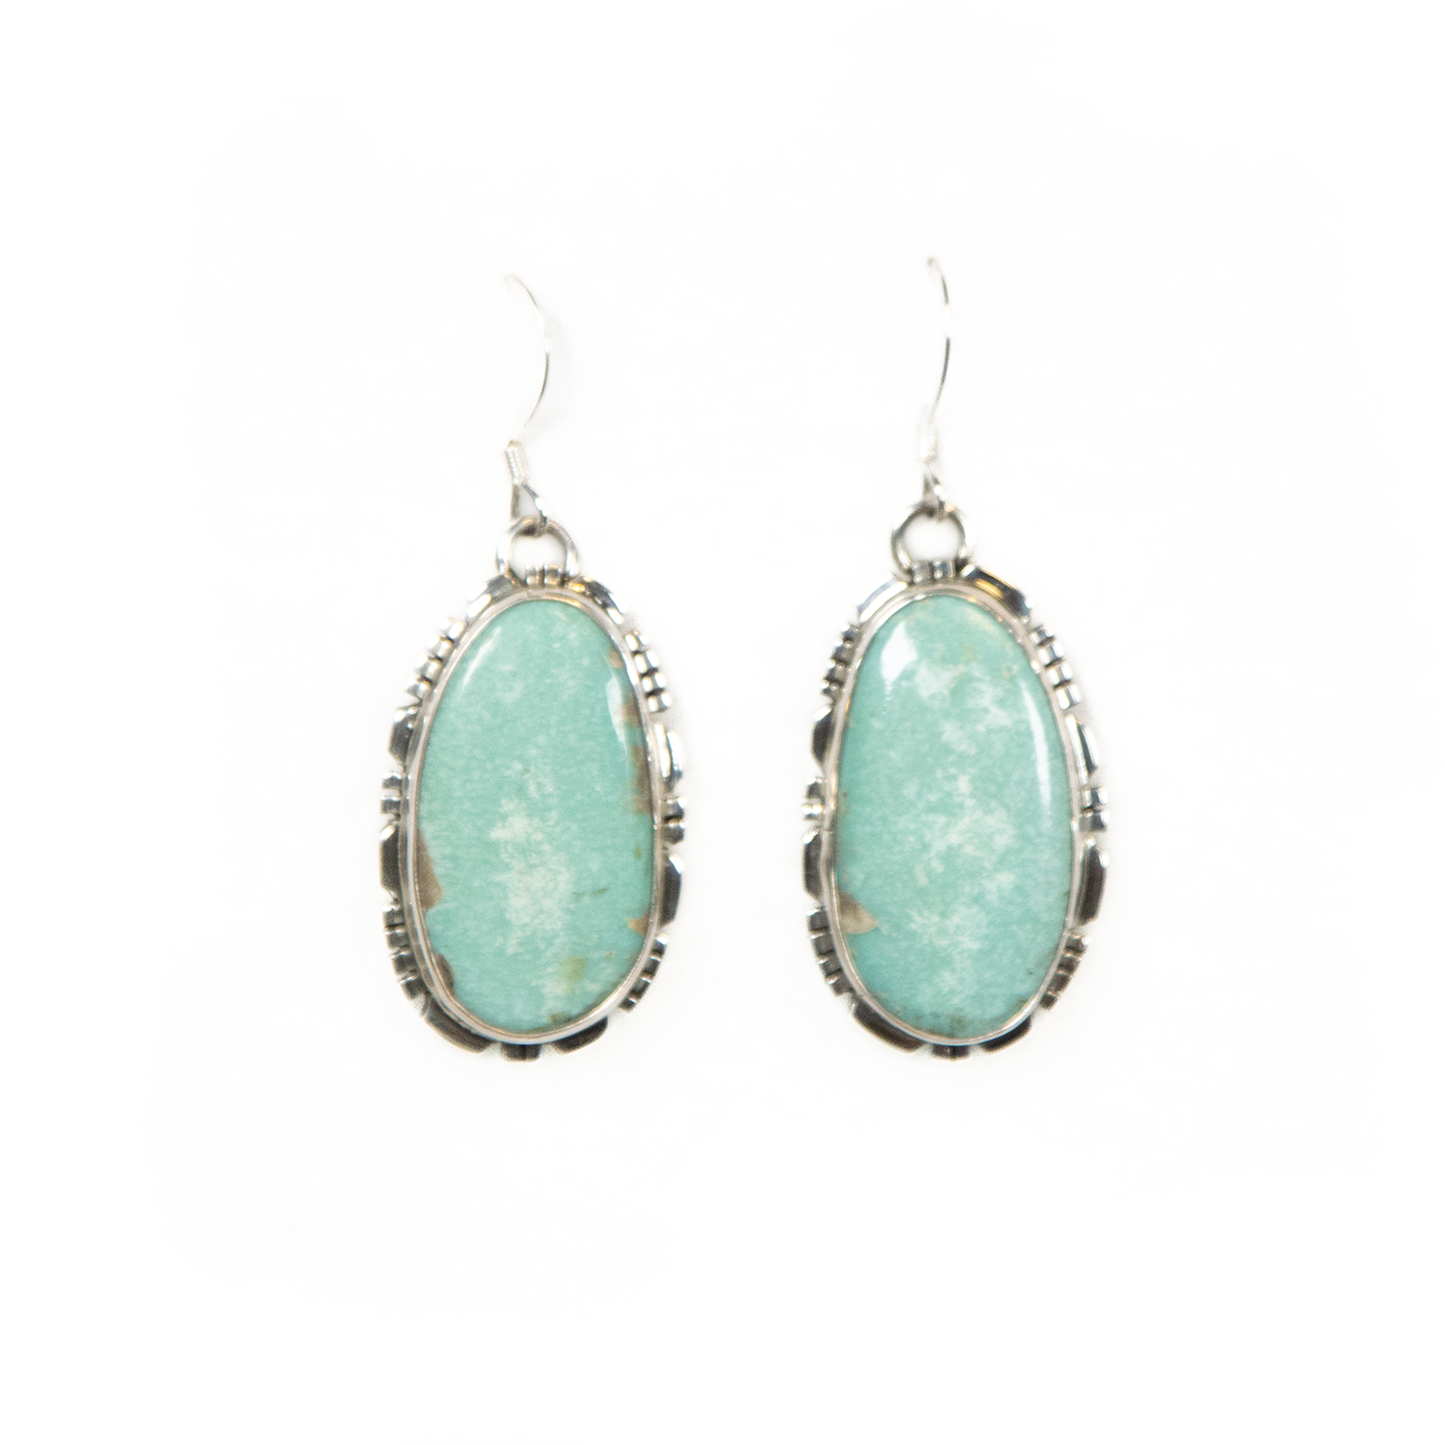 White Water Turquoise Hand-Tooled Earrings by Greg Secatero